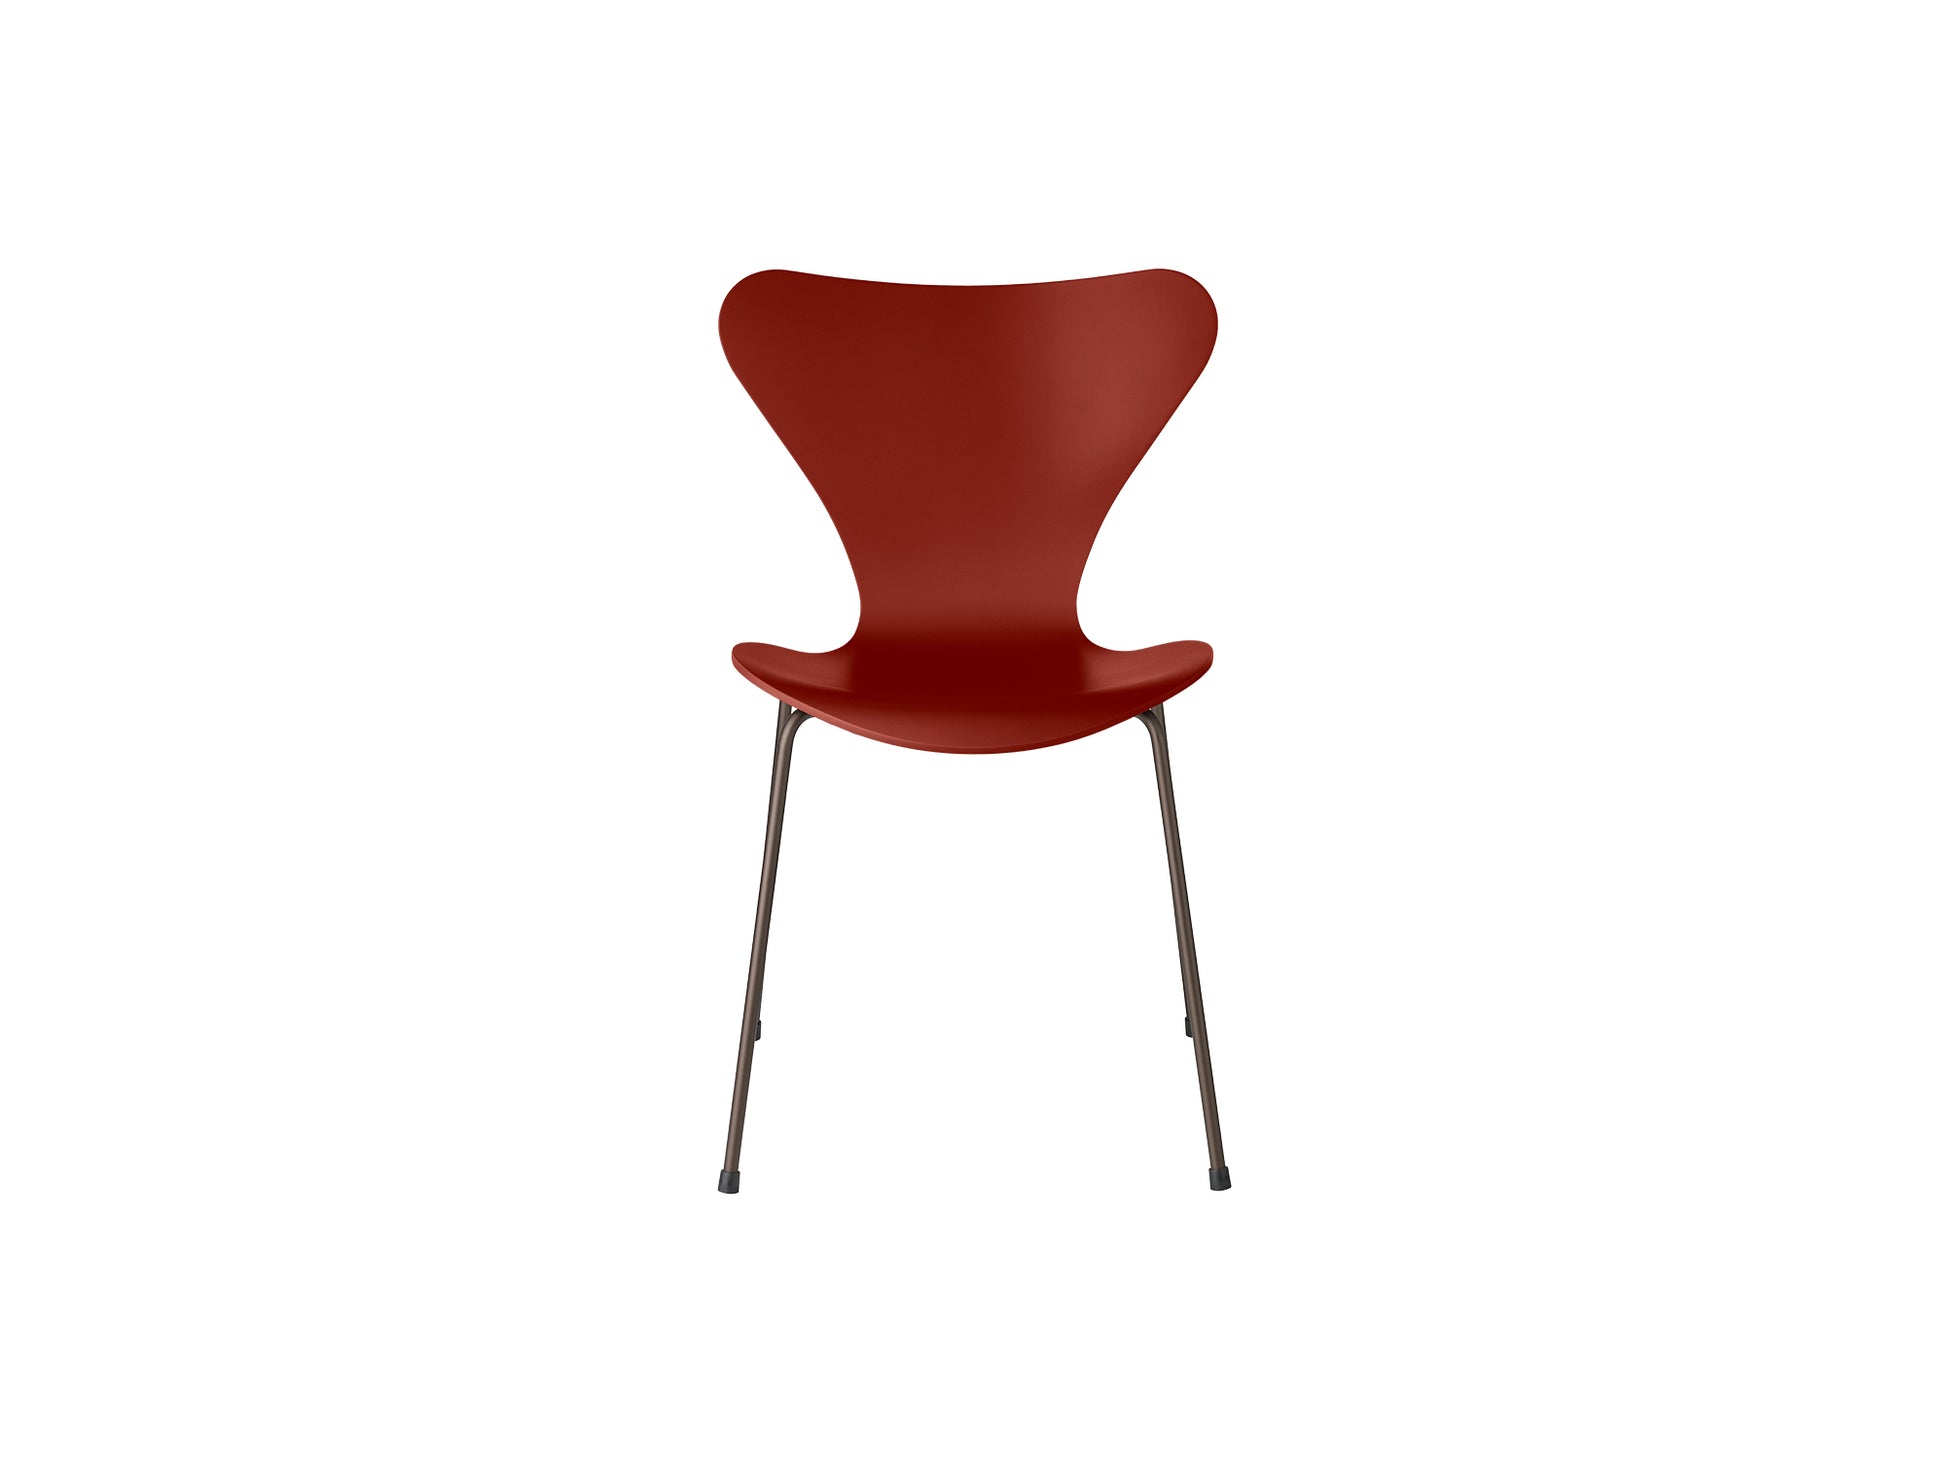 Series 7™ 3107 Dining Chair by Fritz Hansen - Venetian Red Lacquered Veneer Shell / Brown Bronze Steel